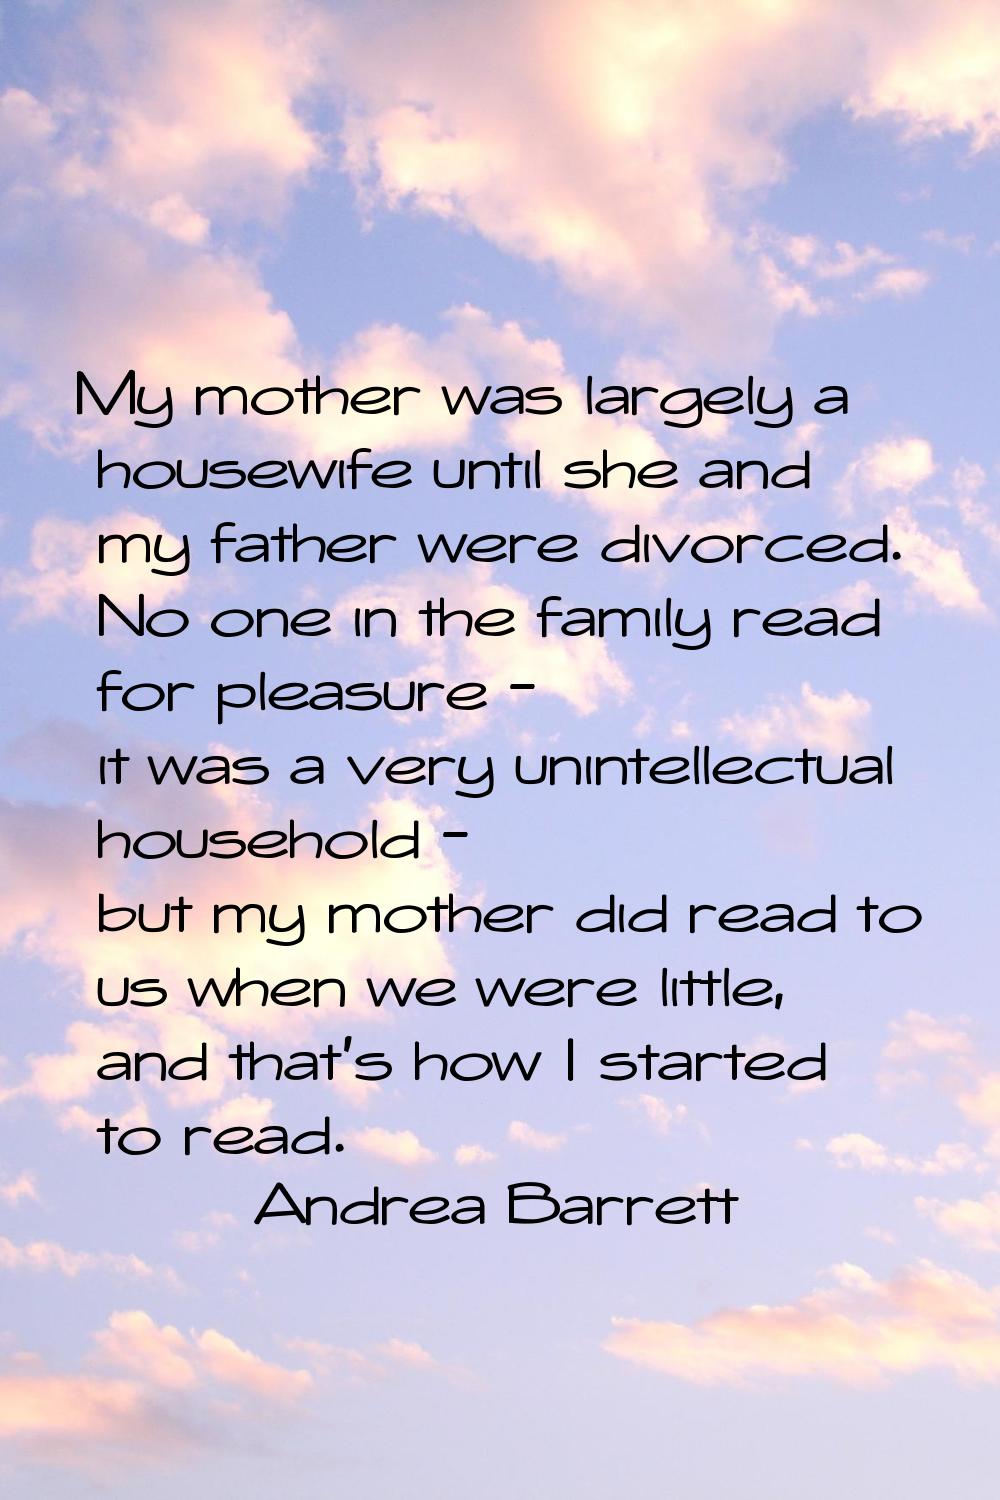 My mother was largely a housewife until she and my father were divorced. No one in the family read 